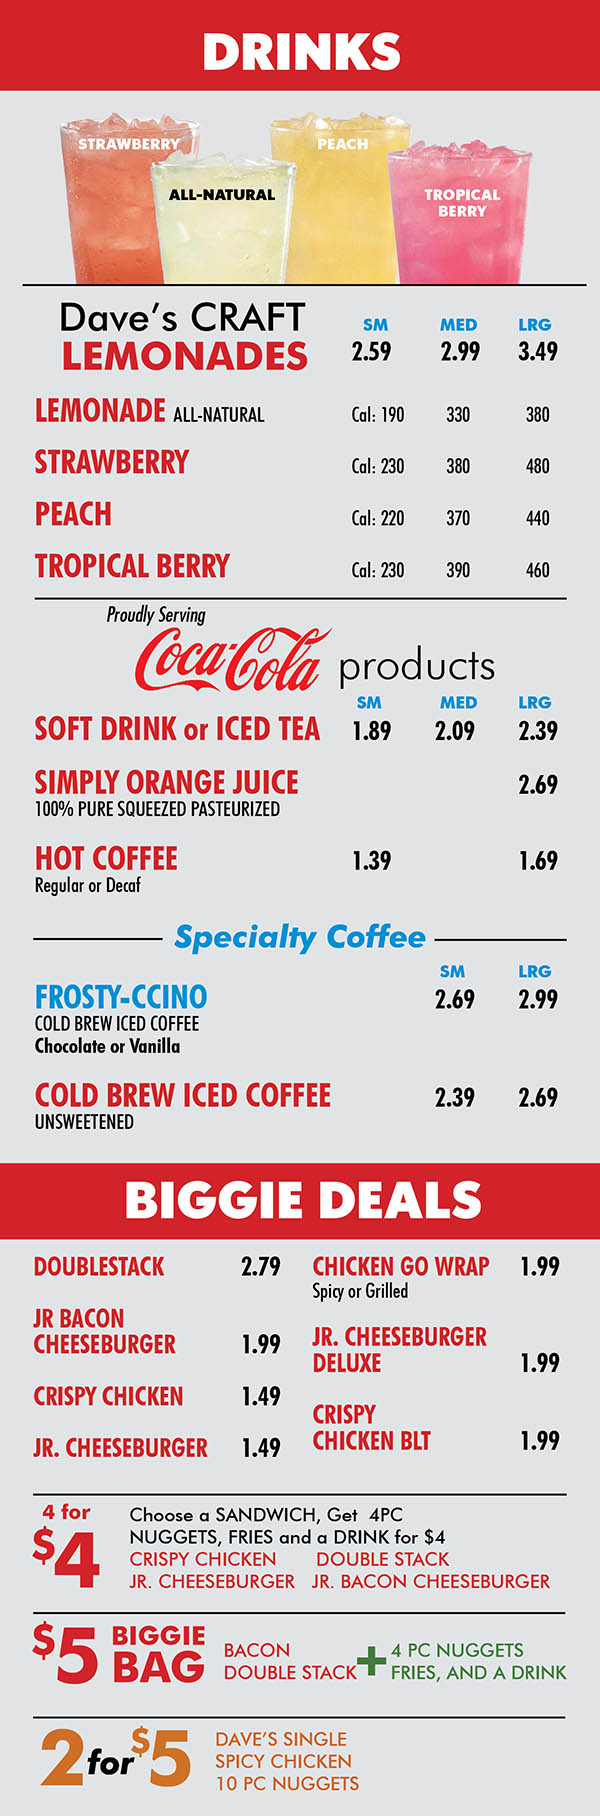 Wendy's Lincoln NE Menu Page 5
DRINKS
STRAWBERRY
PEACH
ALL-NATURAL
TROPICAL
BERRY
Dave’s CRAFT SM MED LRG
LEMONADES 2.59 2.99 3.49 LEMONADE ALL-NATURAL Cal: 190 330 380
STRAWBERRY Cal: 230 380 480
PEACH Cal: 220 370 440
TROPICAL BERRY Cal: 230 390 460
Proudly Serving
products
SM MED LRG
SOFT DRINK or ICED TEA 1.89 2.09 2.39
SIMPLY ORANGE JUICE 2.69
100% PURE SQUEEZED PASTEURIZED
HOT COFFEE 1.39 1.69
Regular or Decaf
Specialty Coffee
SM LRG
FROSTY-CCINO 2.69 2.99
COLD BREW ICED COFFEE
Chocolate or Vanilla
COLD BREW ICED COFFEE 2.39 2.69
UNSWEETENED
BIGGIE DEALS
DOUBLESTACK 2.79 JR BACON CHEESEBURGER 1.99 CRISPY CHICKEN 1.49 JR. CHEESEBURGER 1.49
CHICKEN GO WRAP 1.99
Spicy or Grilled
JR. CHEESEBURGER
DELUXE 1.99
CRISPY
CHICKEN BLT 1.99
4 for
$4
Choose a SANDWICH, Get 4PC
NUGGETS, FRIES and a DRINK for $4
CRISPY CHICKEN DOUBLE STACK
JR. CHEESEBURGER JR. BACON CHEESEBURGER
$5
BIGGIE
BAG
BACON
DOUBLE STACK
+
4 PC NUGGETS
FRIES, AND A DRINK
2for$5
DAVE’S SINGLE
SPICY CHICKEN
10 PC NUGGETS